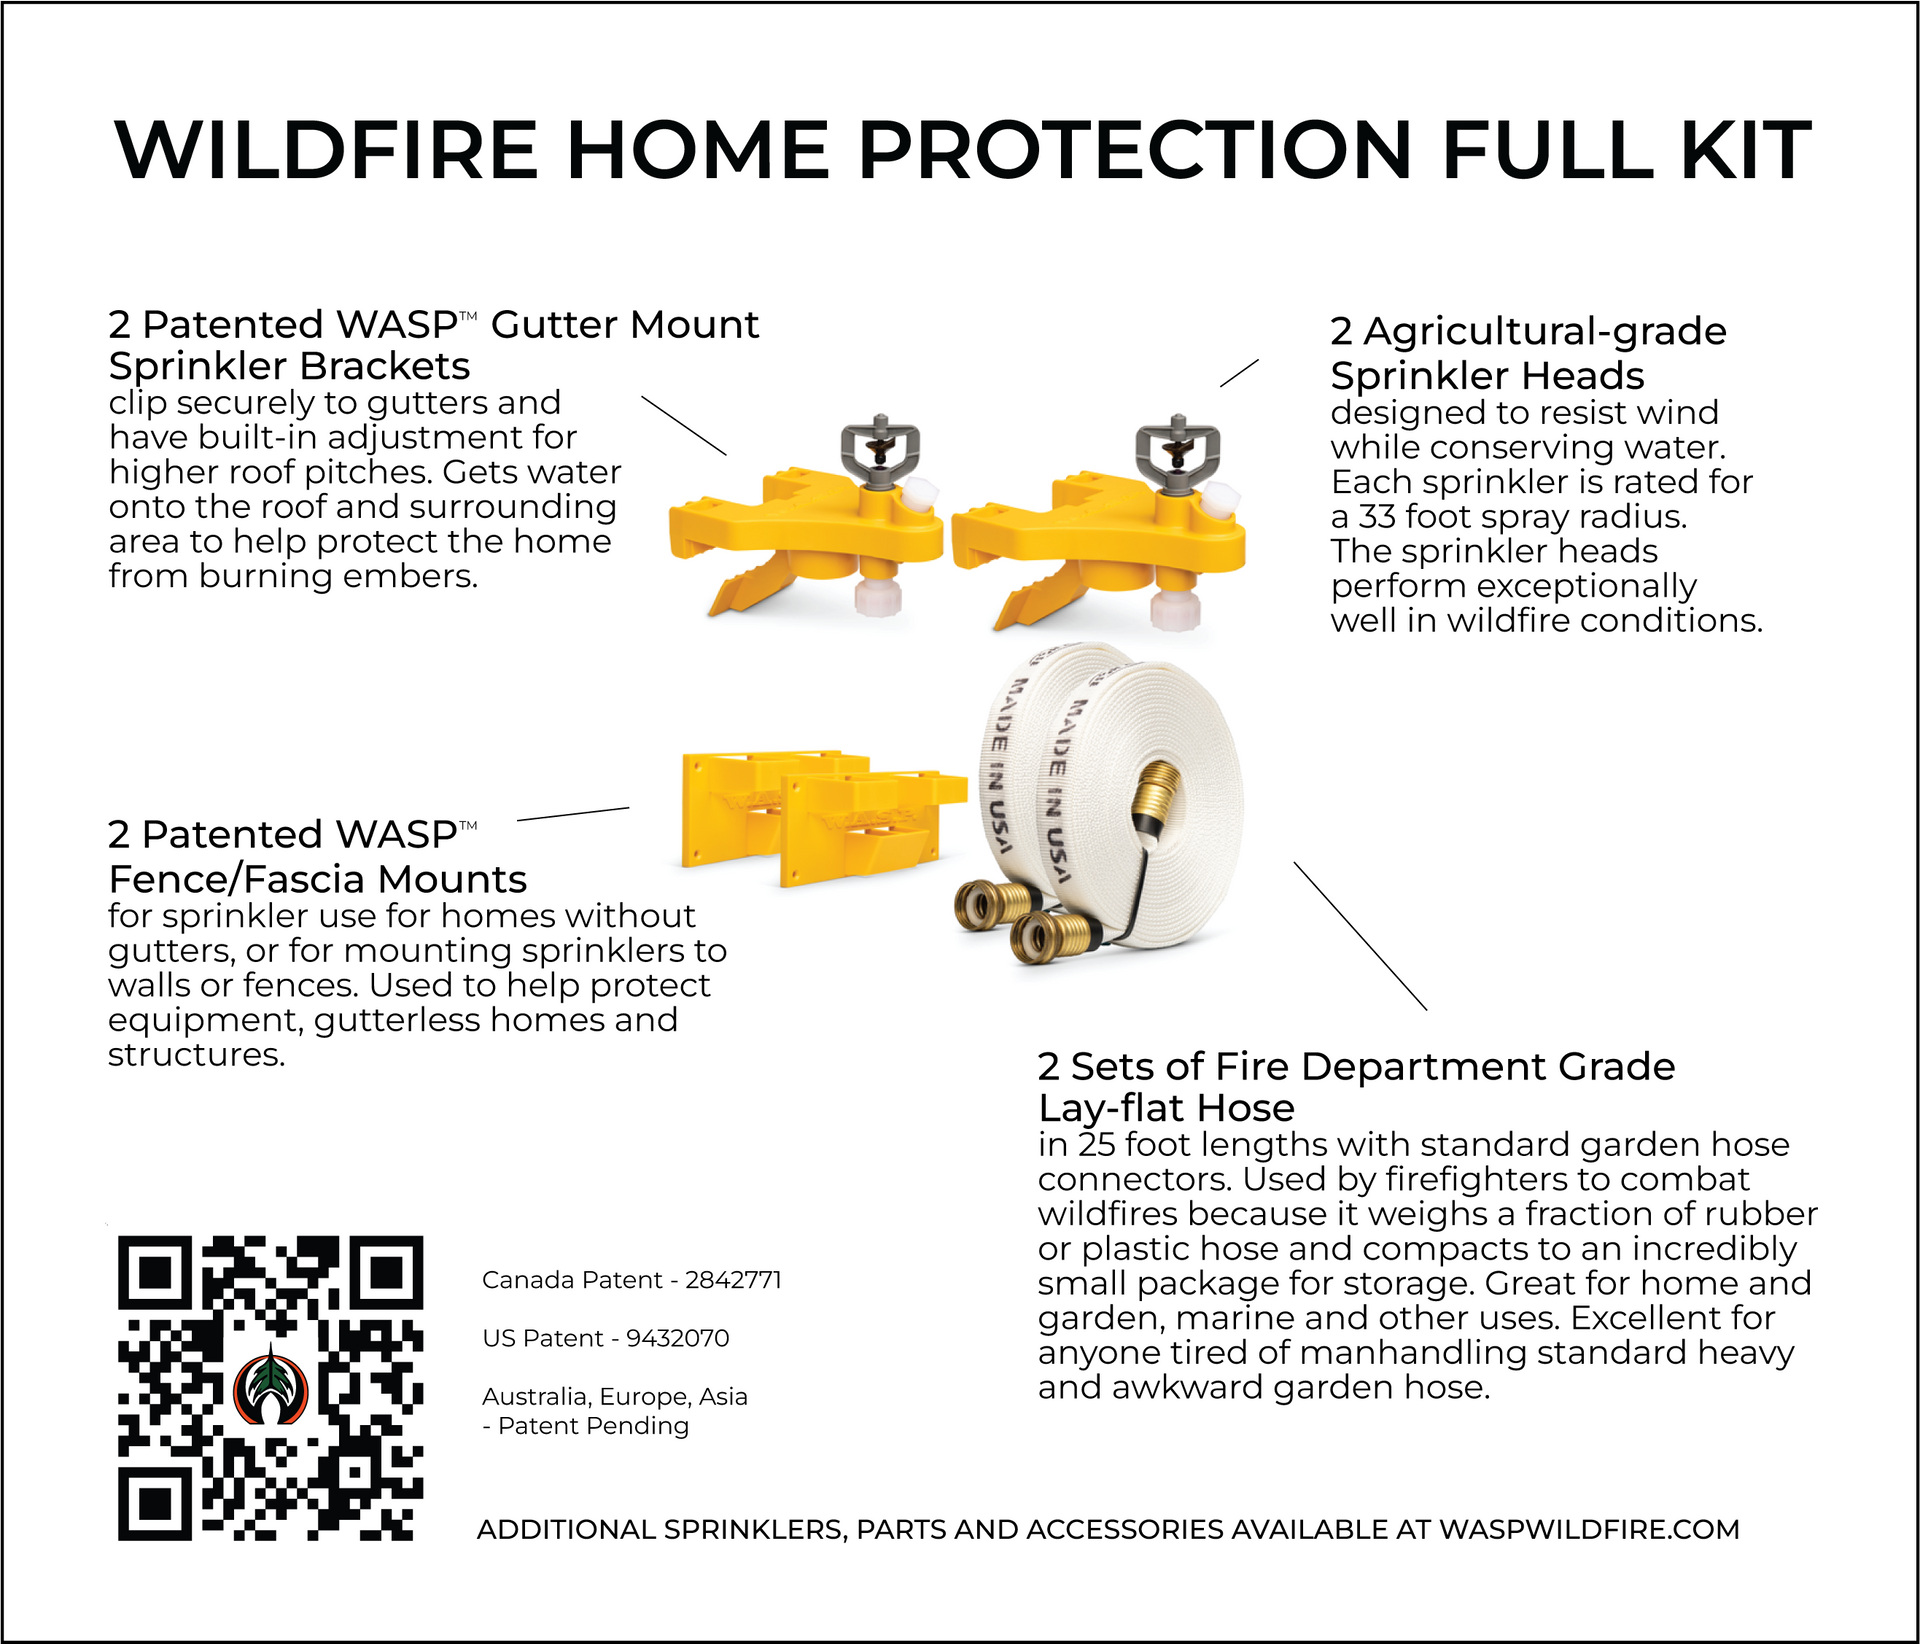 A picture of a wildfire home protection full kit and contents details